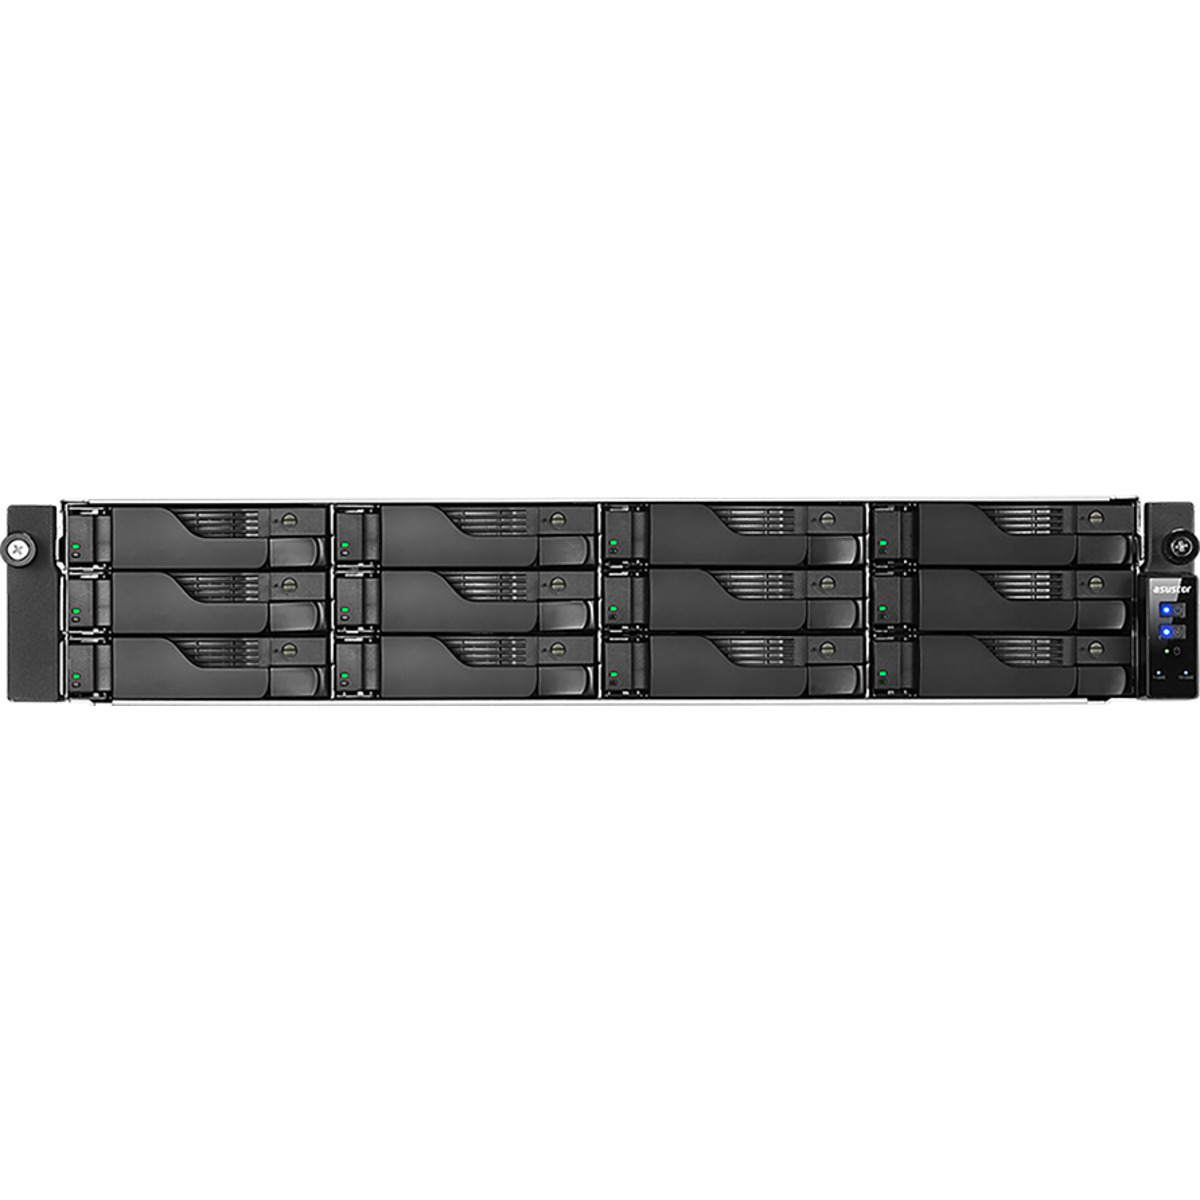 ASUSTOR LOCKERSTOR 12RD AS6512RD 28tb 12-Bay RackMount Multimedia / Power User / Business NAS - Network Attached Storage Device 7x4tb Sandisk Ultra 3D SDSSDH3-4T00 2.5 560/520MB/s SATA 6Gb/s SSD CONSUMER Class Drives Installed - Burn-In Tested - FREE RAM UPGRADE LOCKERSTOR 12RD AS6512RD